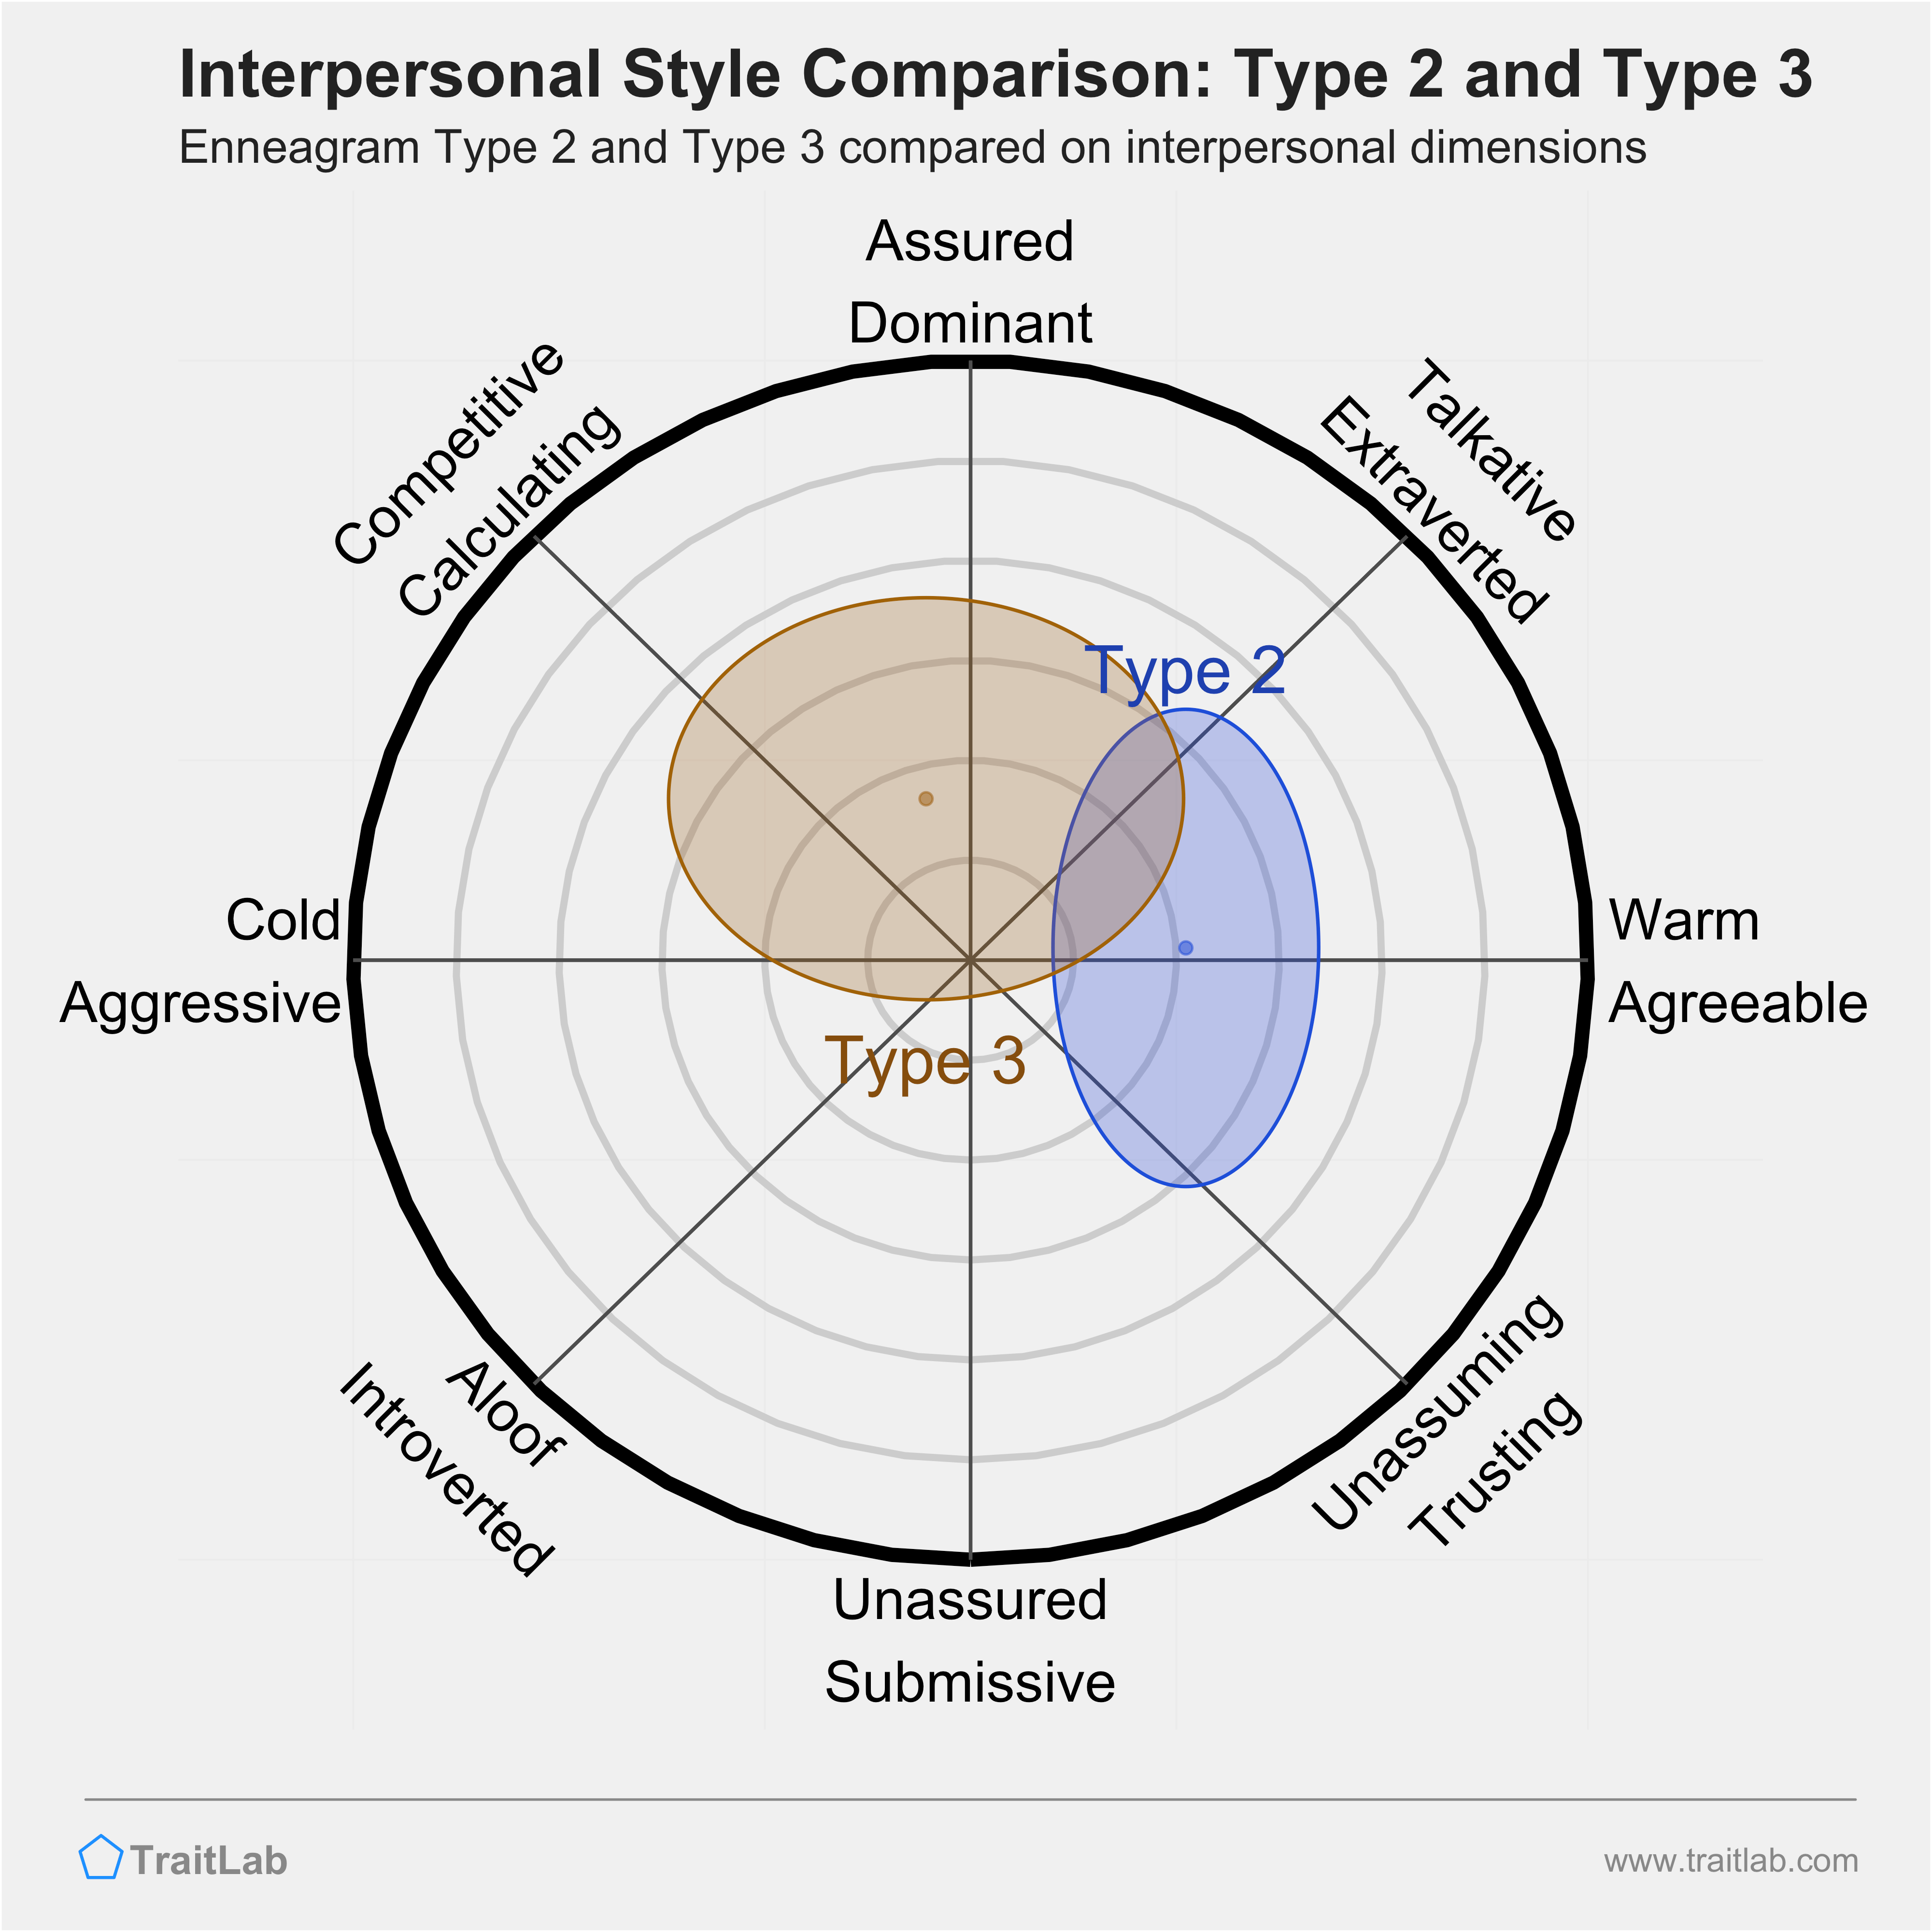 Enneagram Type 2 and Type 3 comparison across interpersonal dimensions